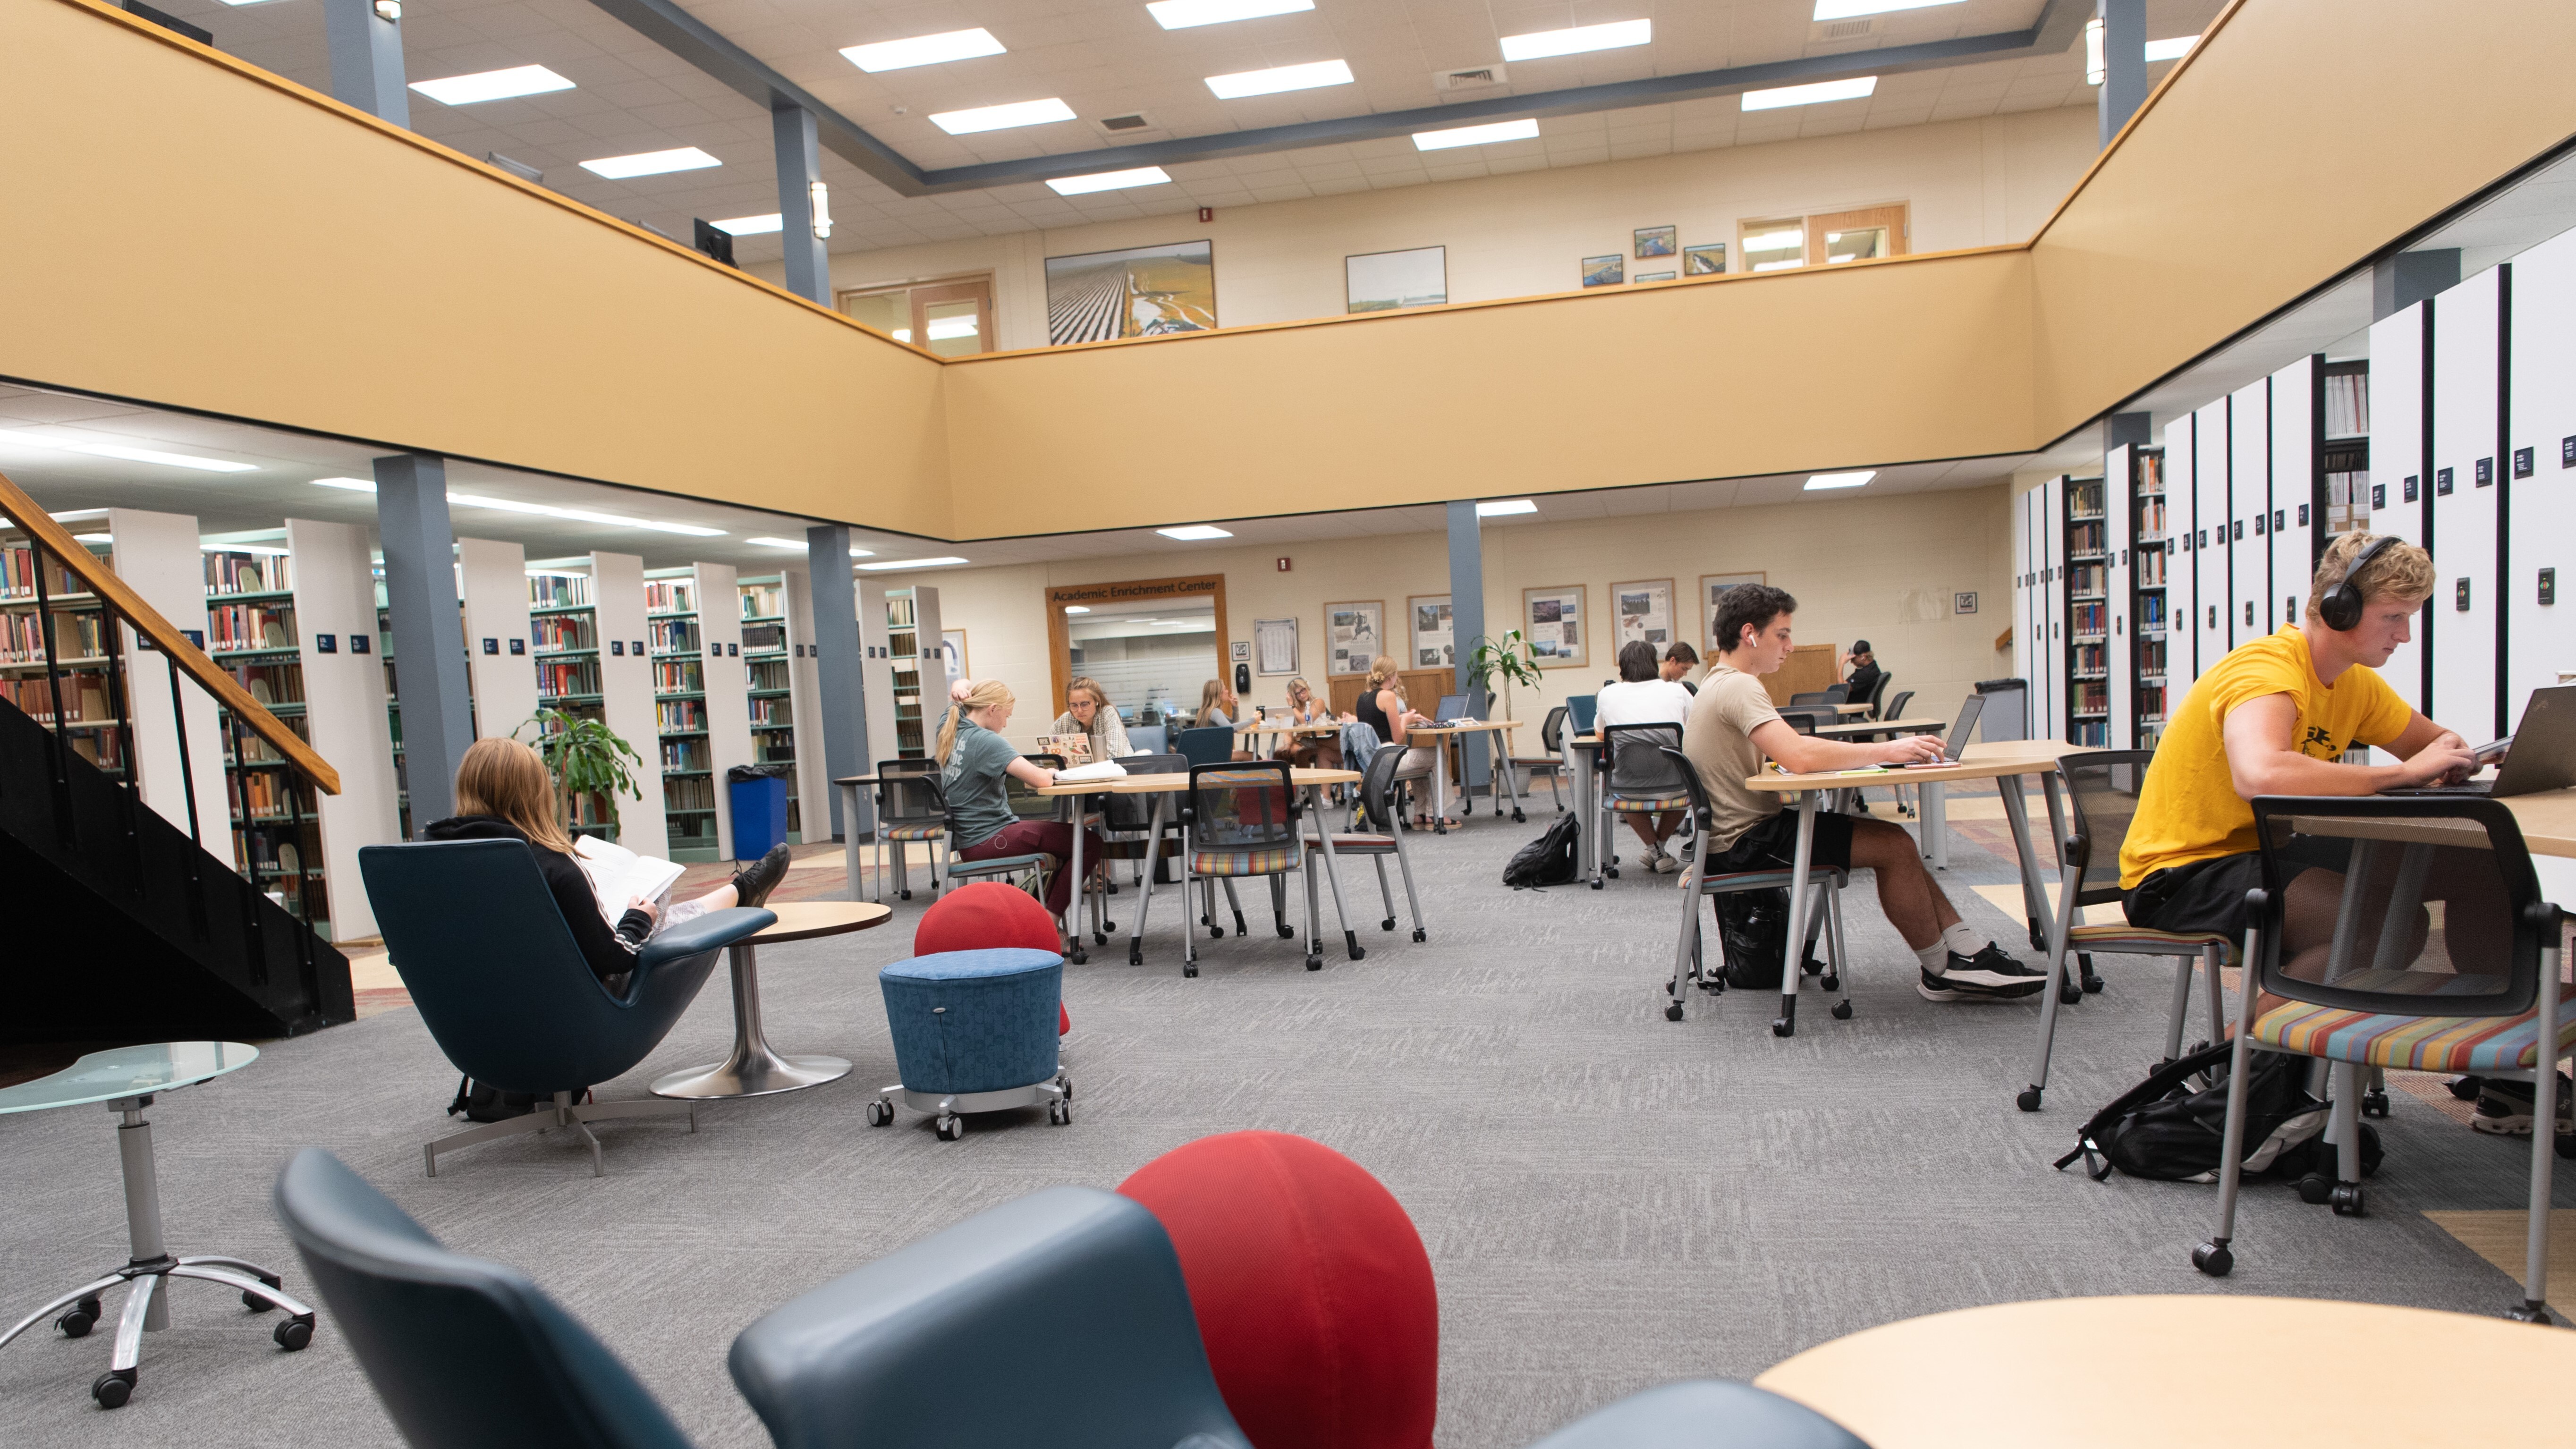 Students sitting in the library